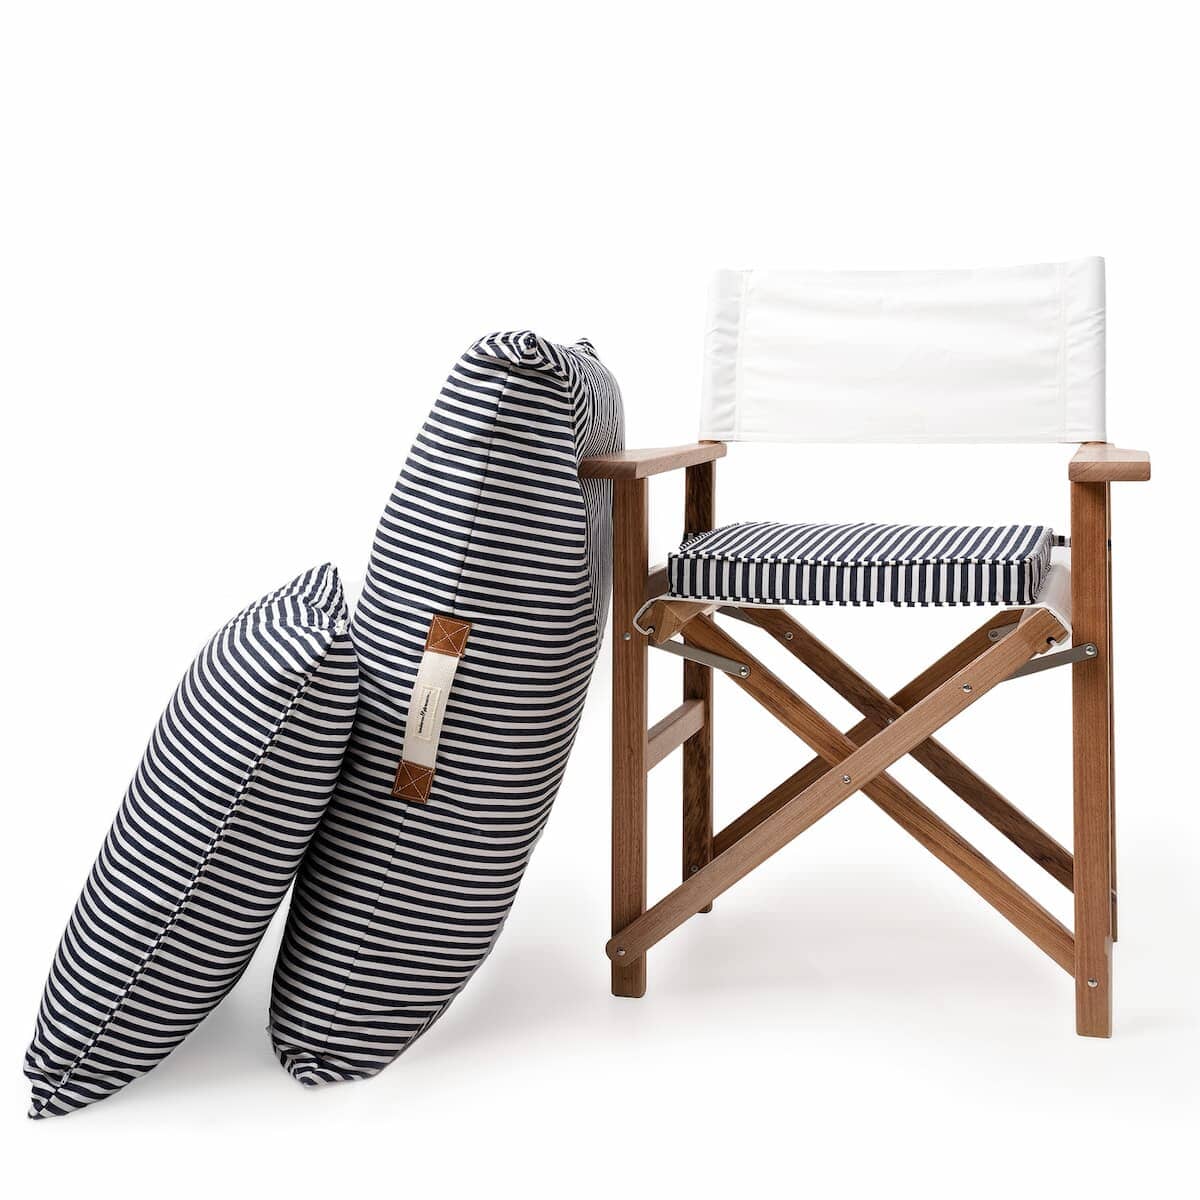 Studio image of floor cushion and euro cushion leaning against a directors chair